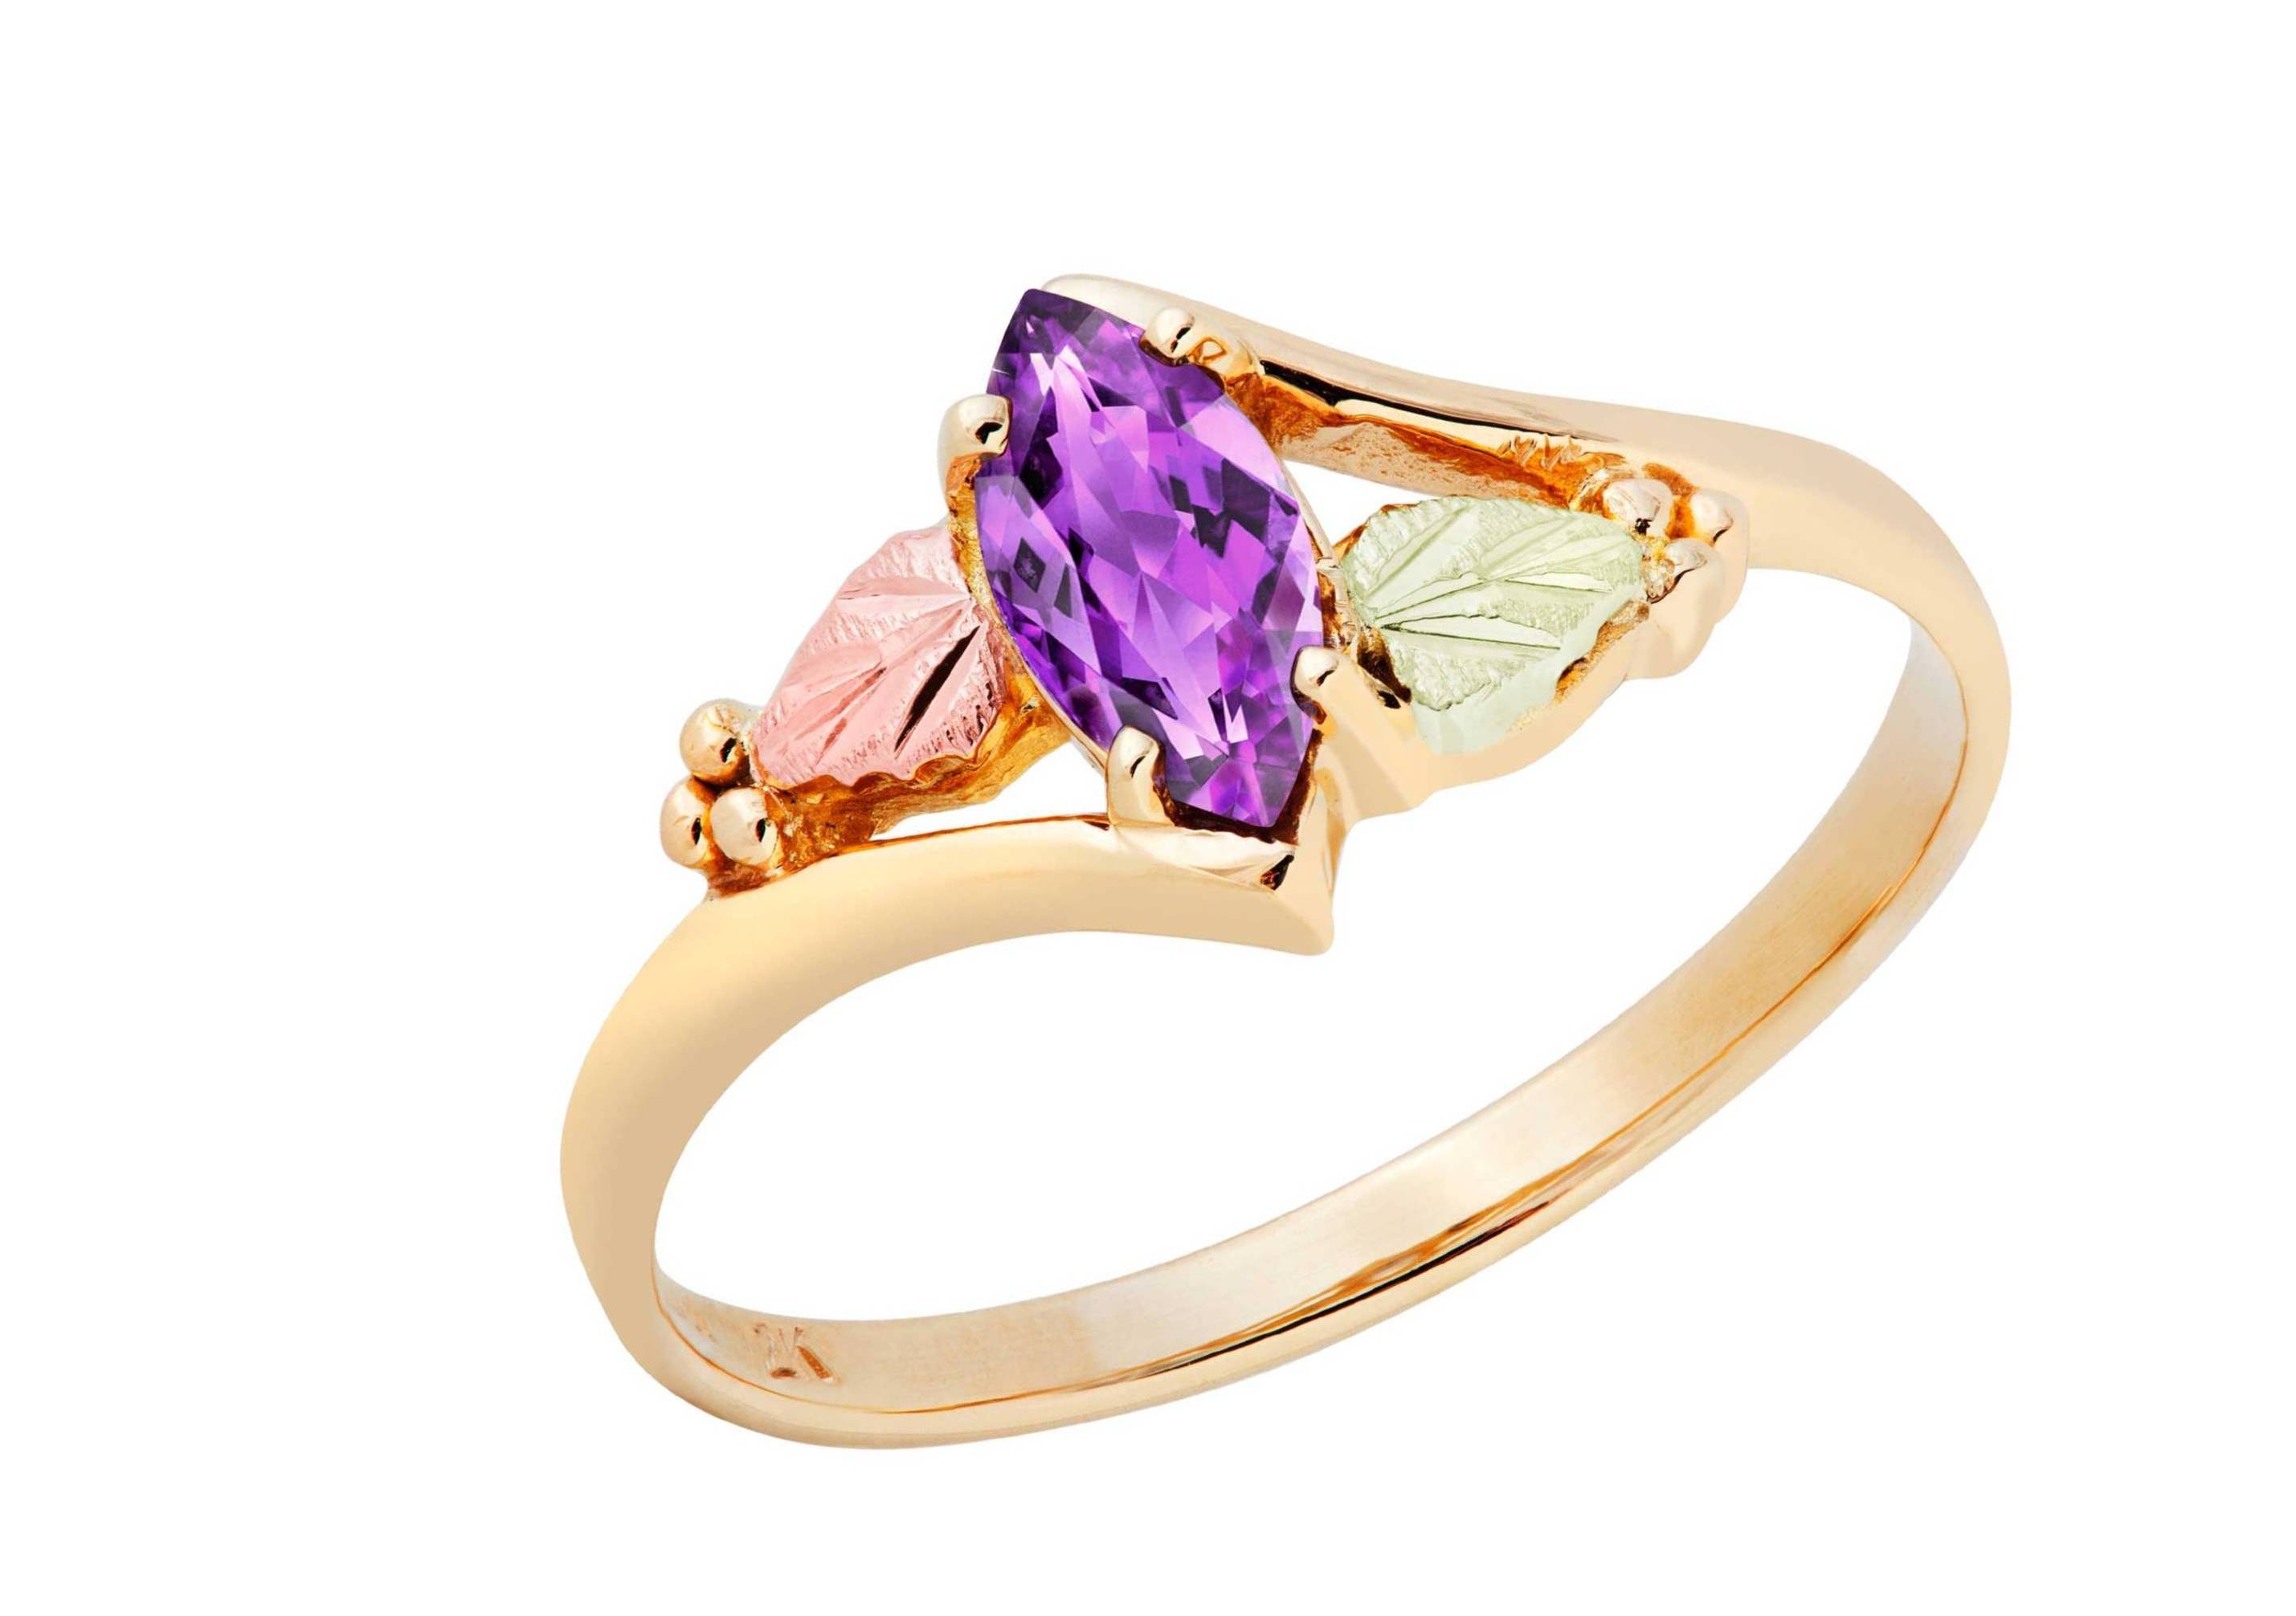 Created Soude Amethyst Marquise February Birthstone Bypass Ring, Black Hills Gold motif. 